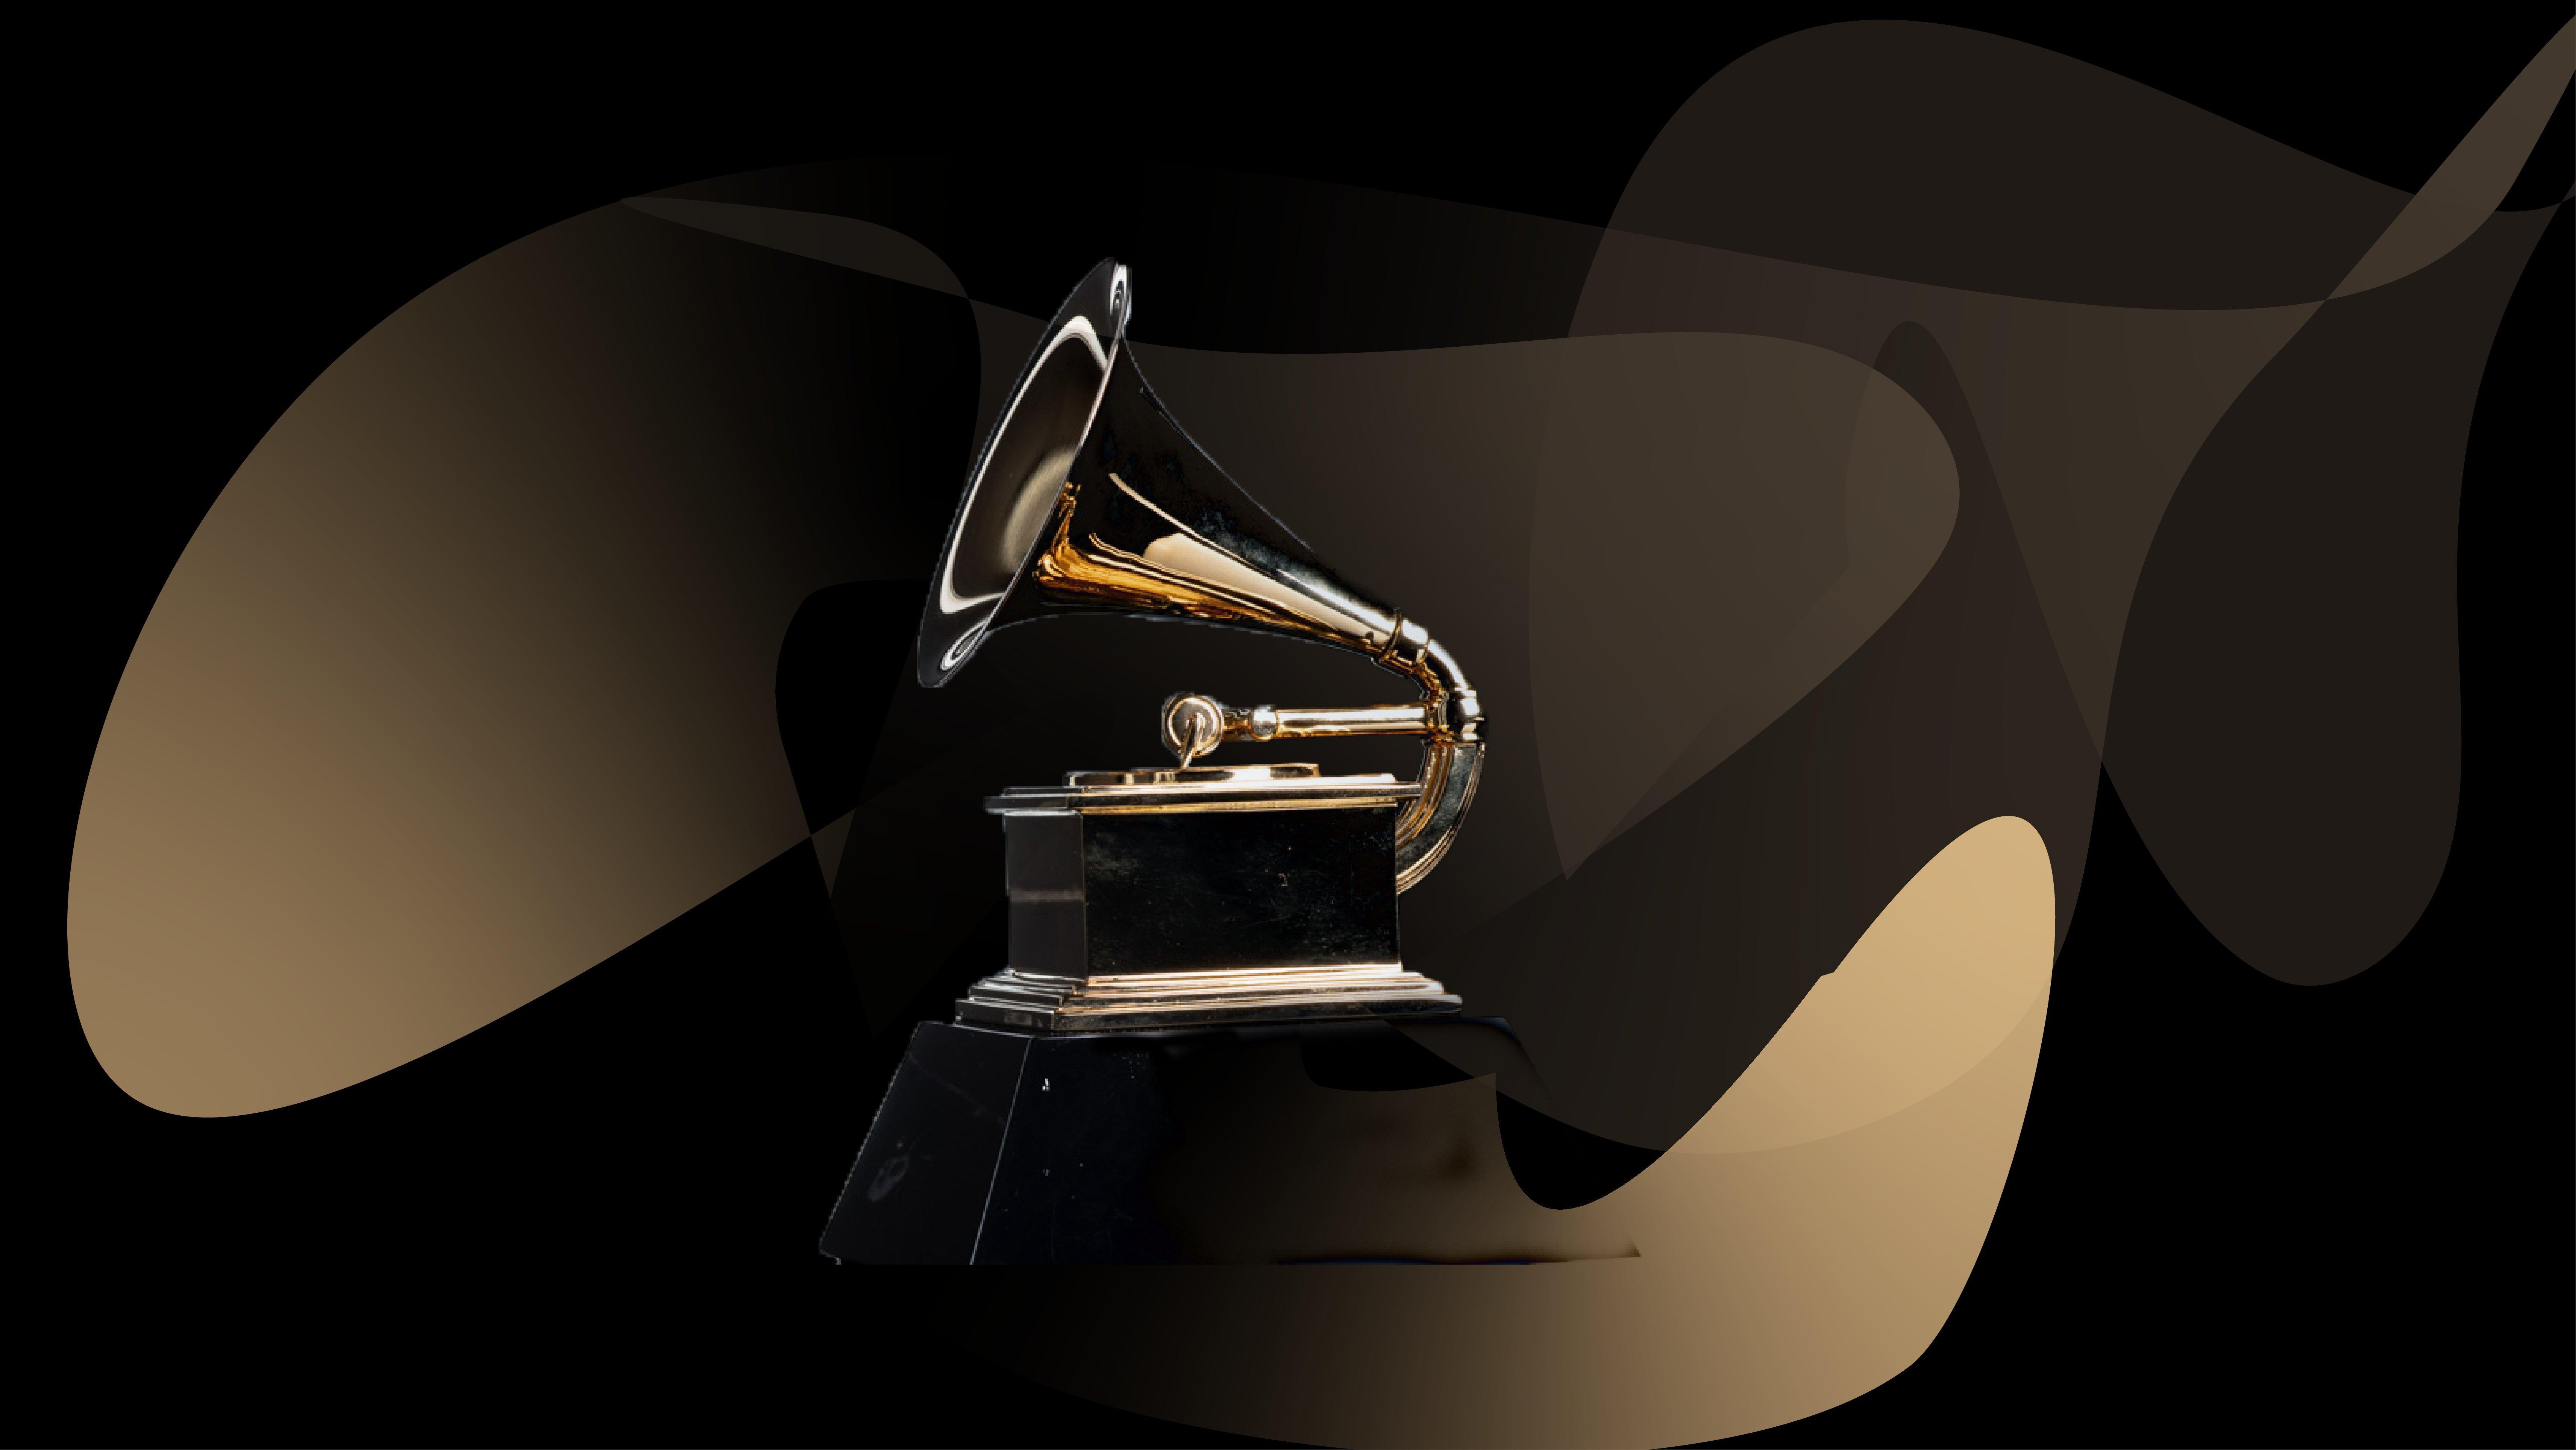 Graphic featuring a photo of the GRAMMY Award trophy